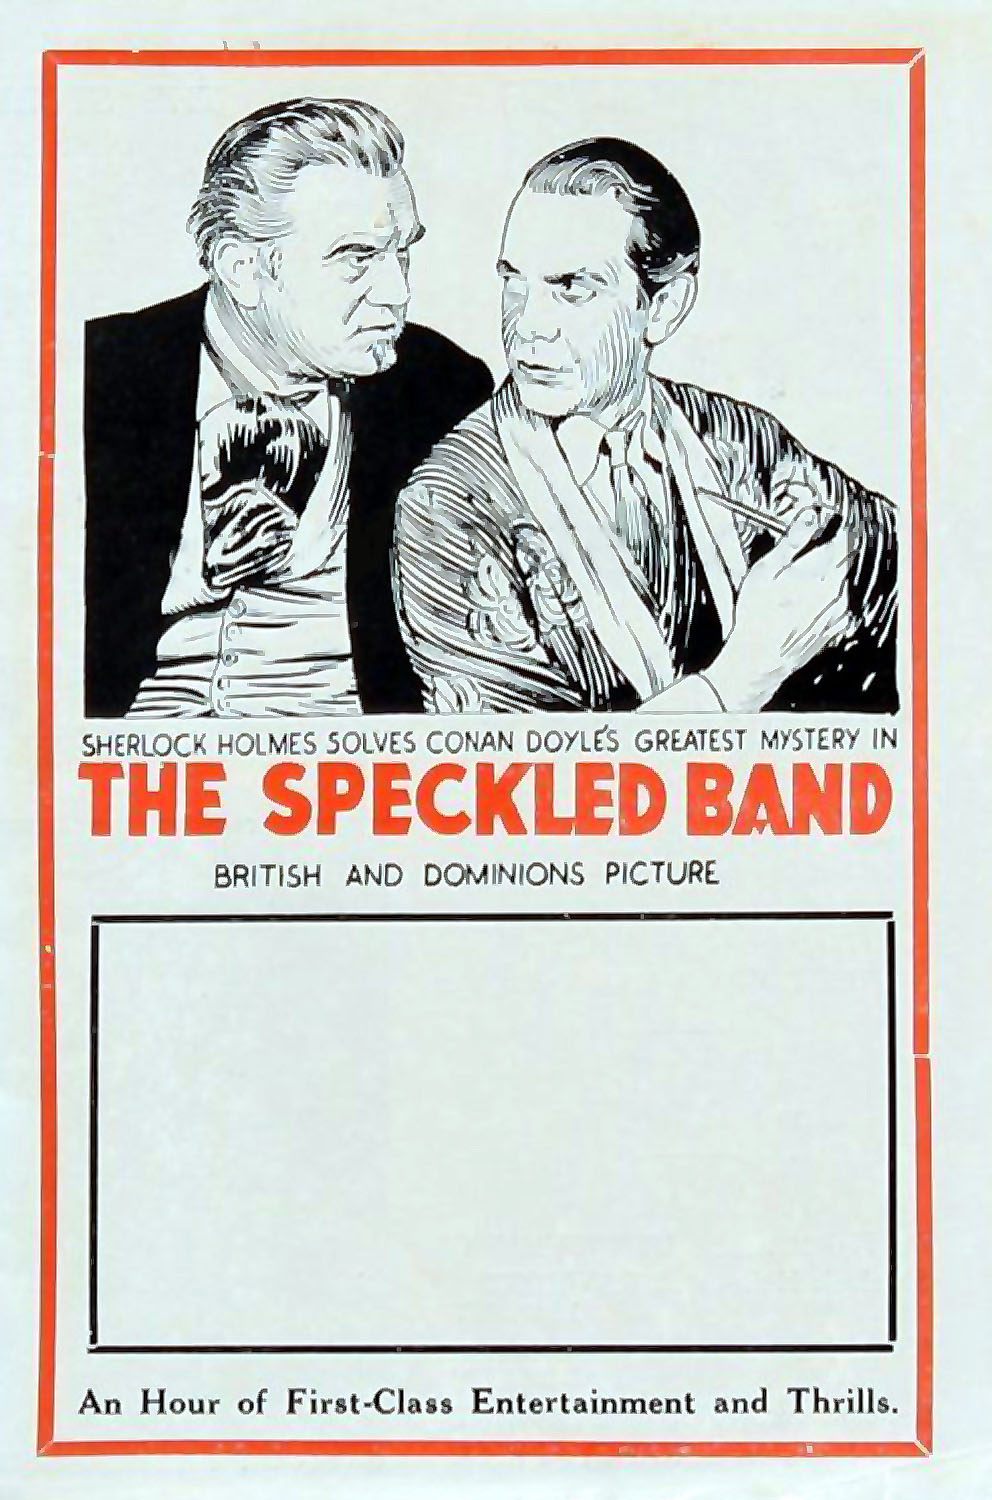 SPECKLED BAND, THE